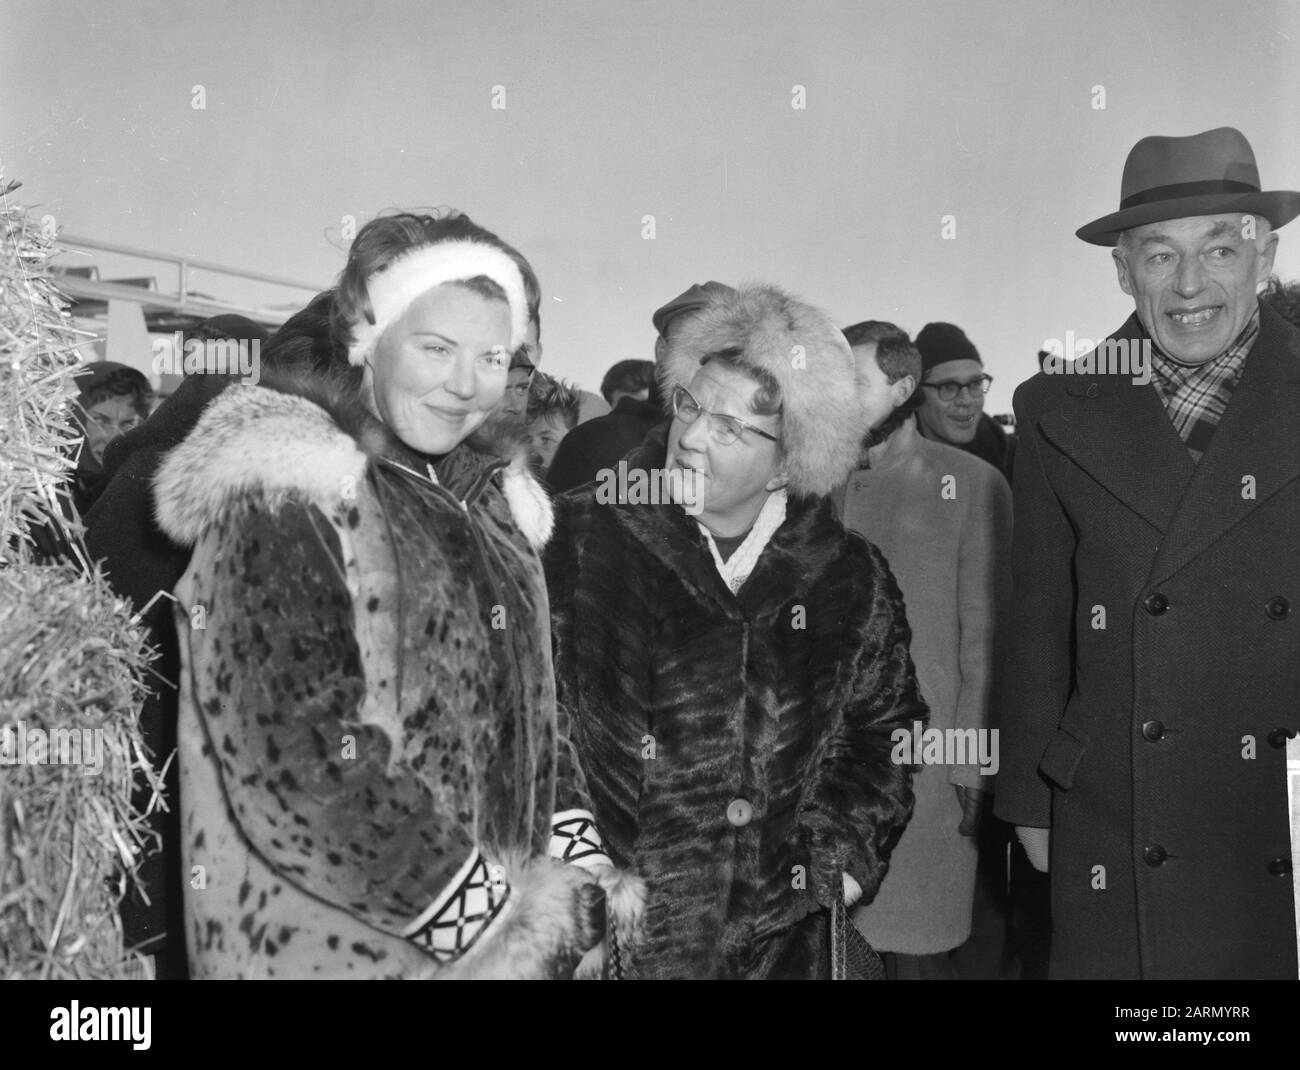 Elfstedentocht 1963. queen Juliana and Princess Beatrix at the finish in Leeuwarden Date: 18 January 1963 Location: Friesland, Leeuwarden Keywords: royal house, skating, sport, spectators Personal name: Beatrix, princess, Juliana (queen Netherlands), Juliana, Queen Institution name: Elfstedentocht Stock Photo